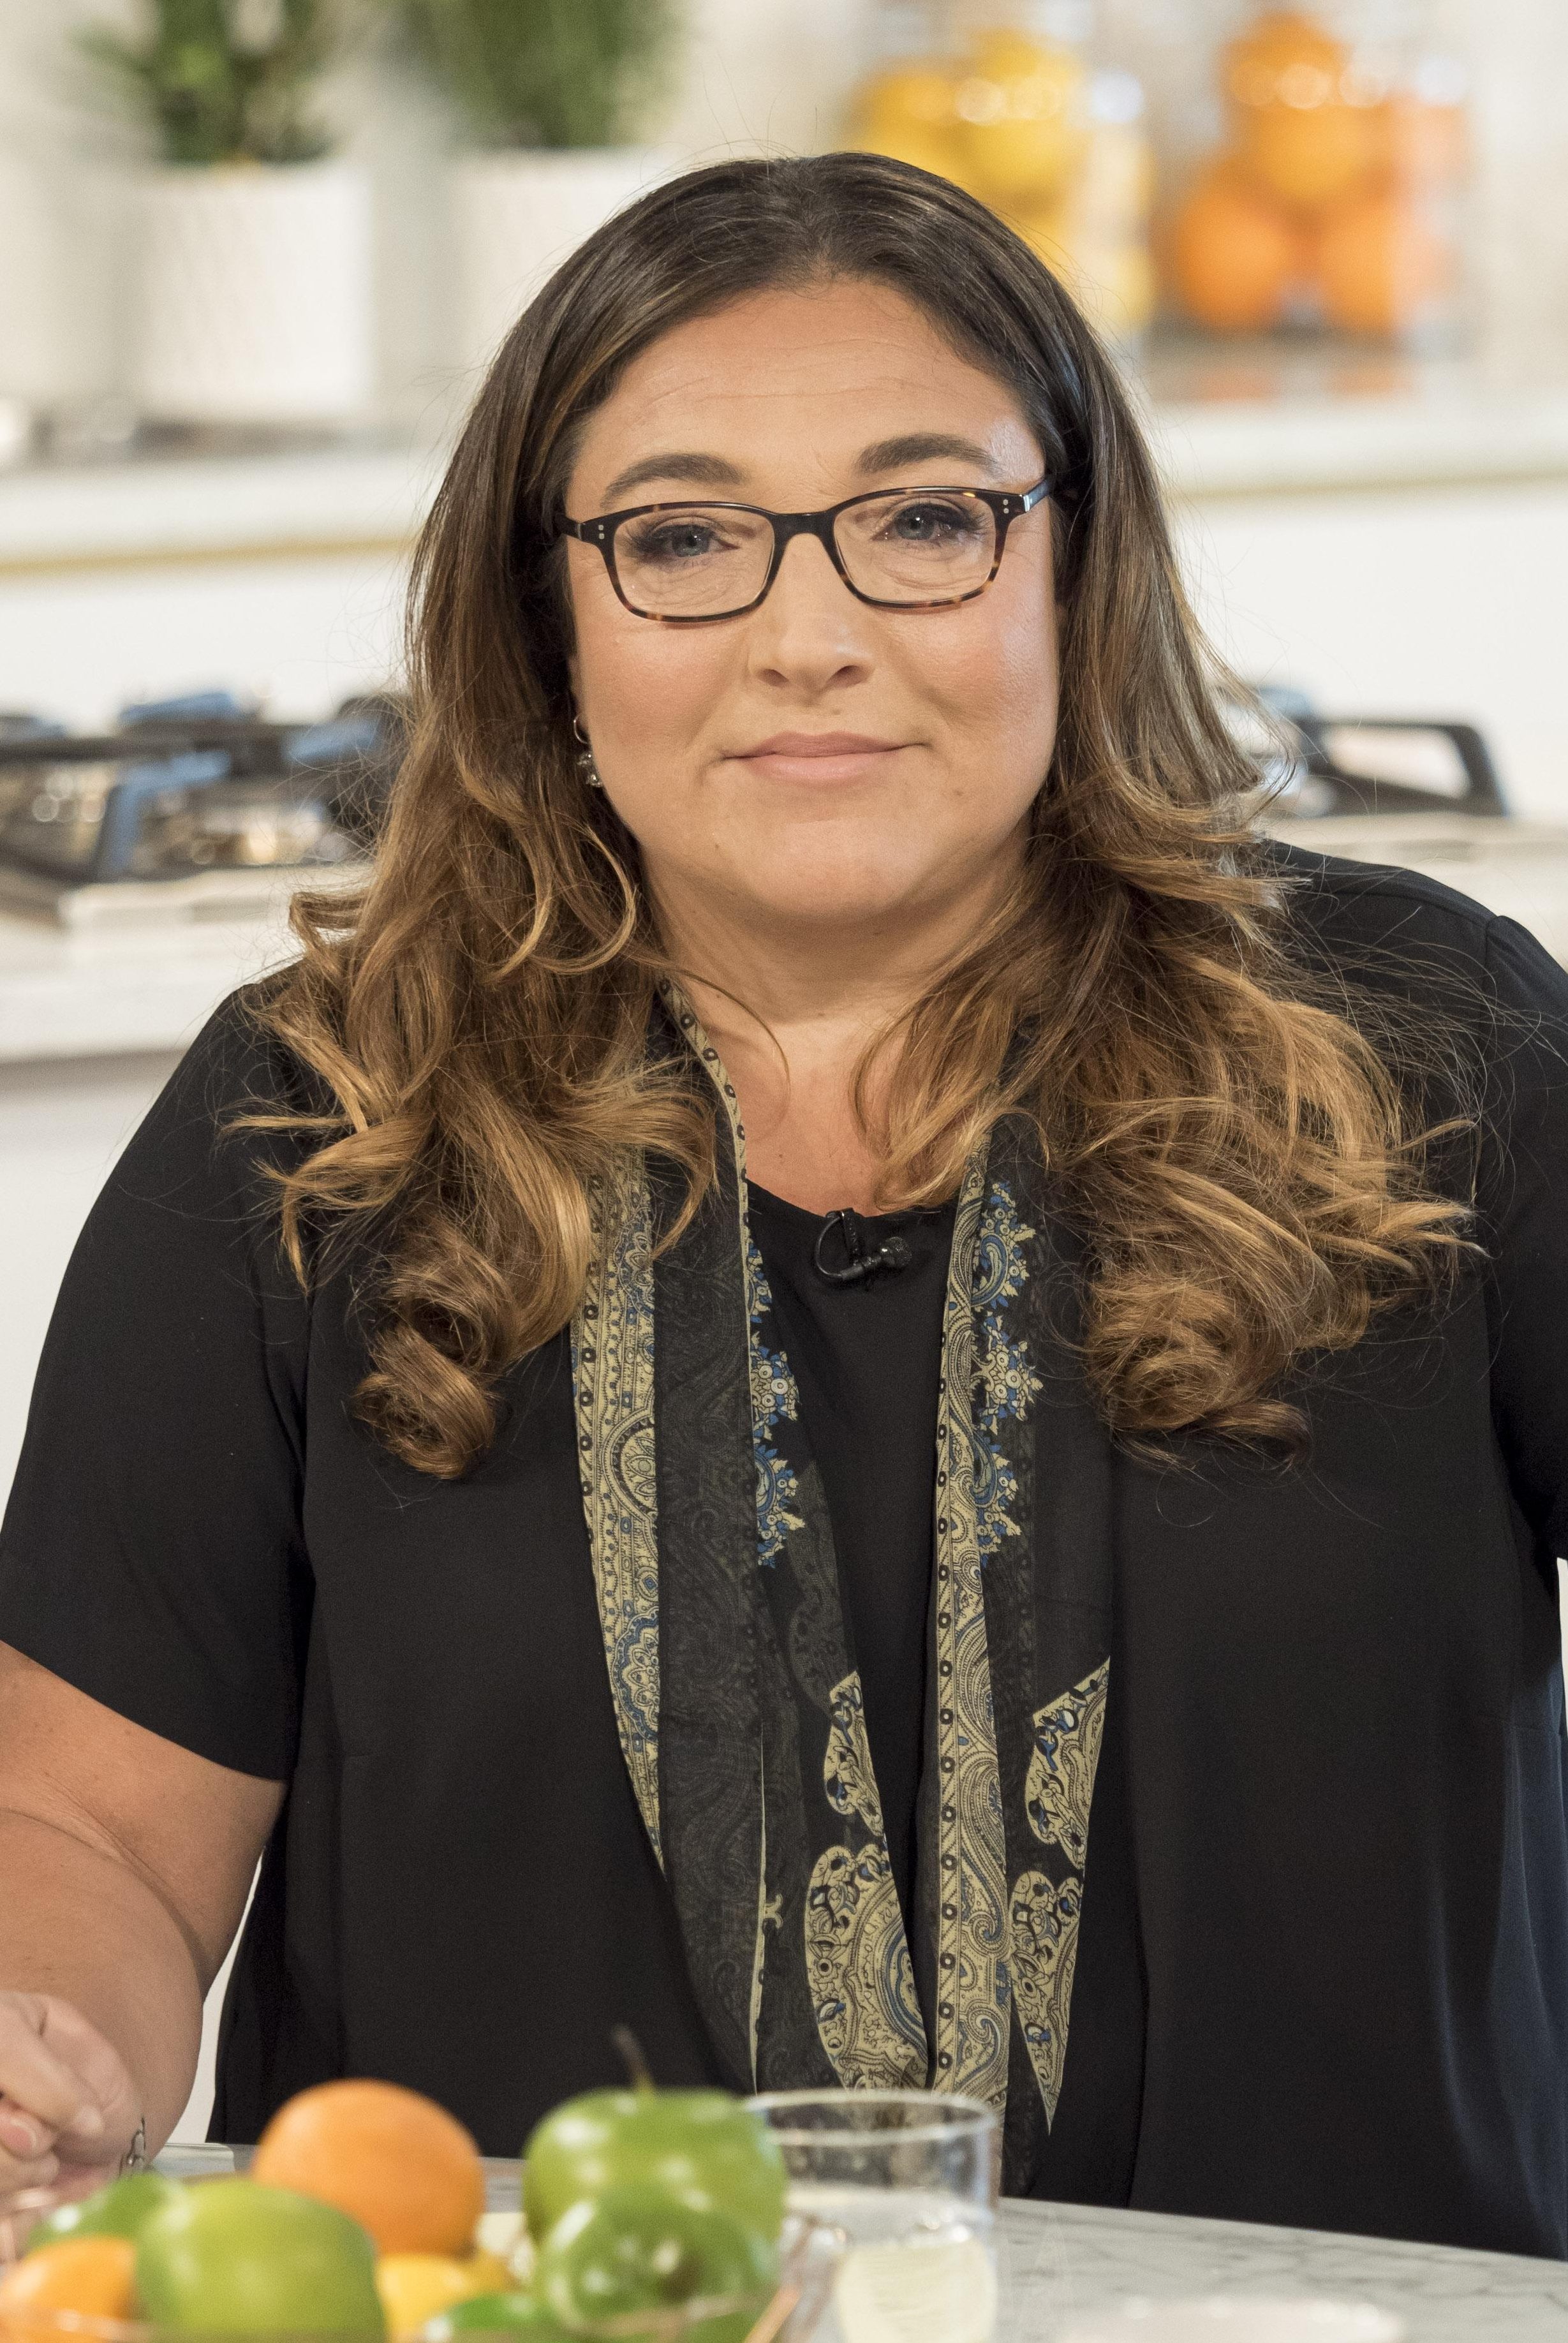 Supernanny Jo Frost Accuses Parents Of Being Lazy And Enabling